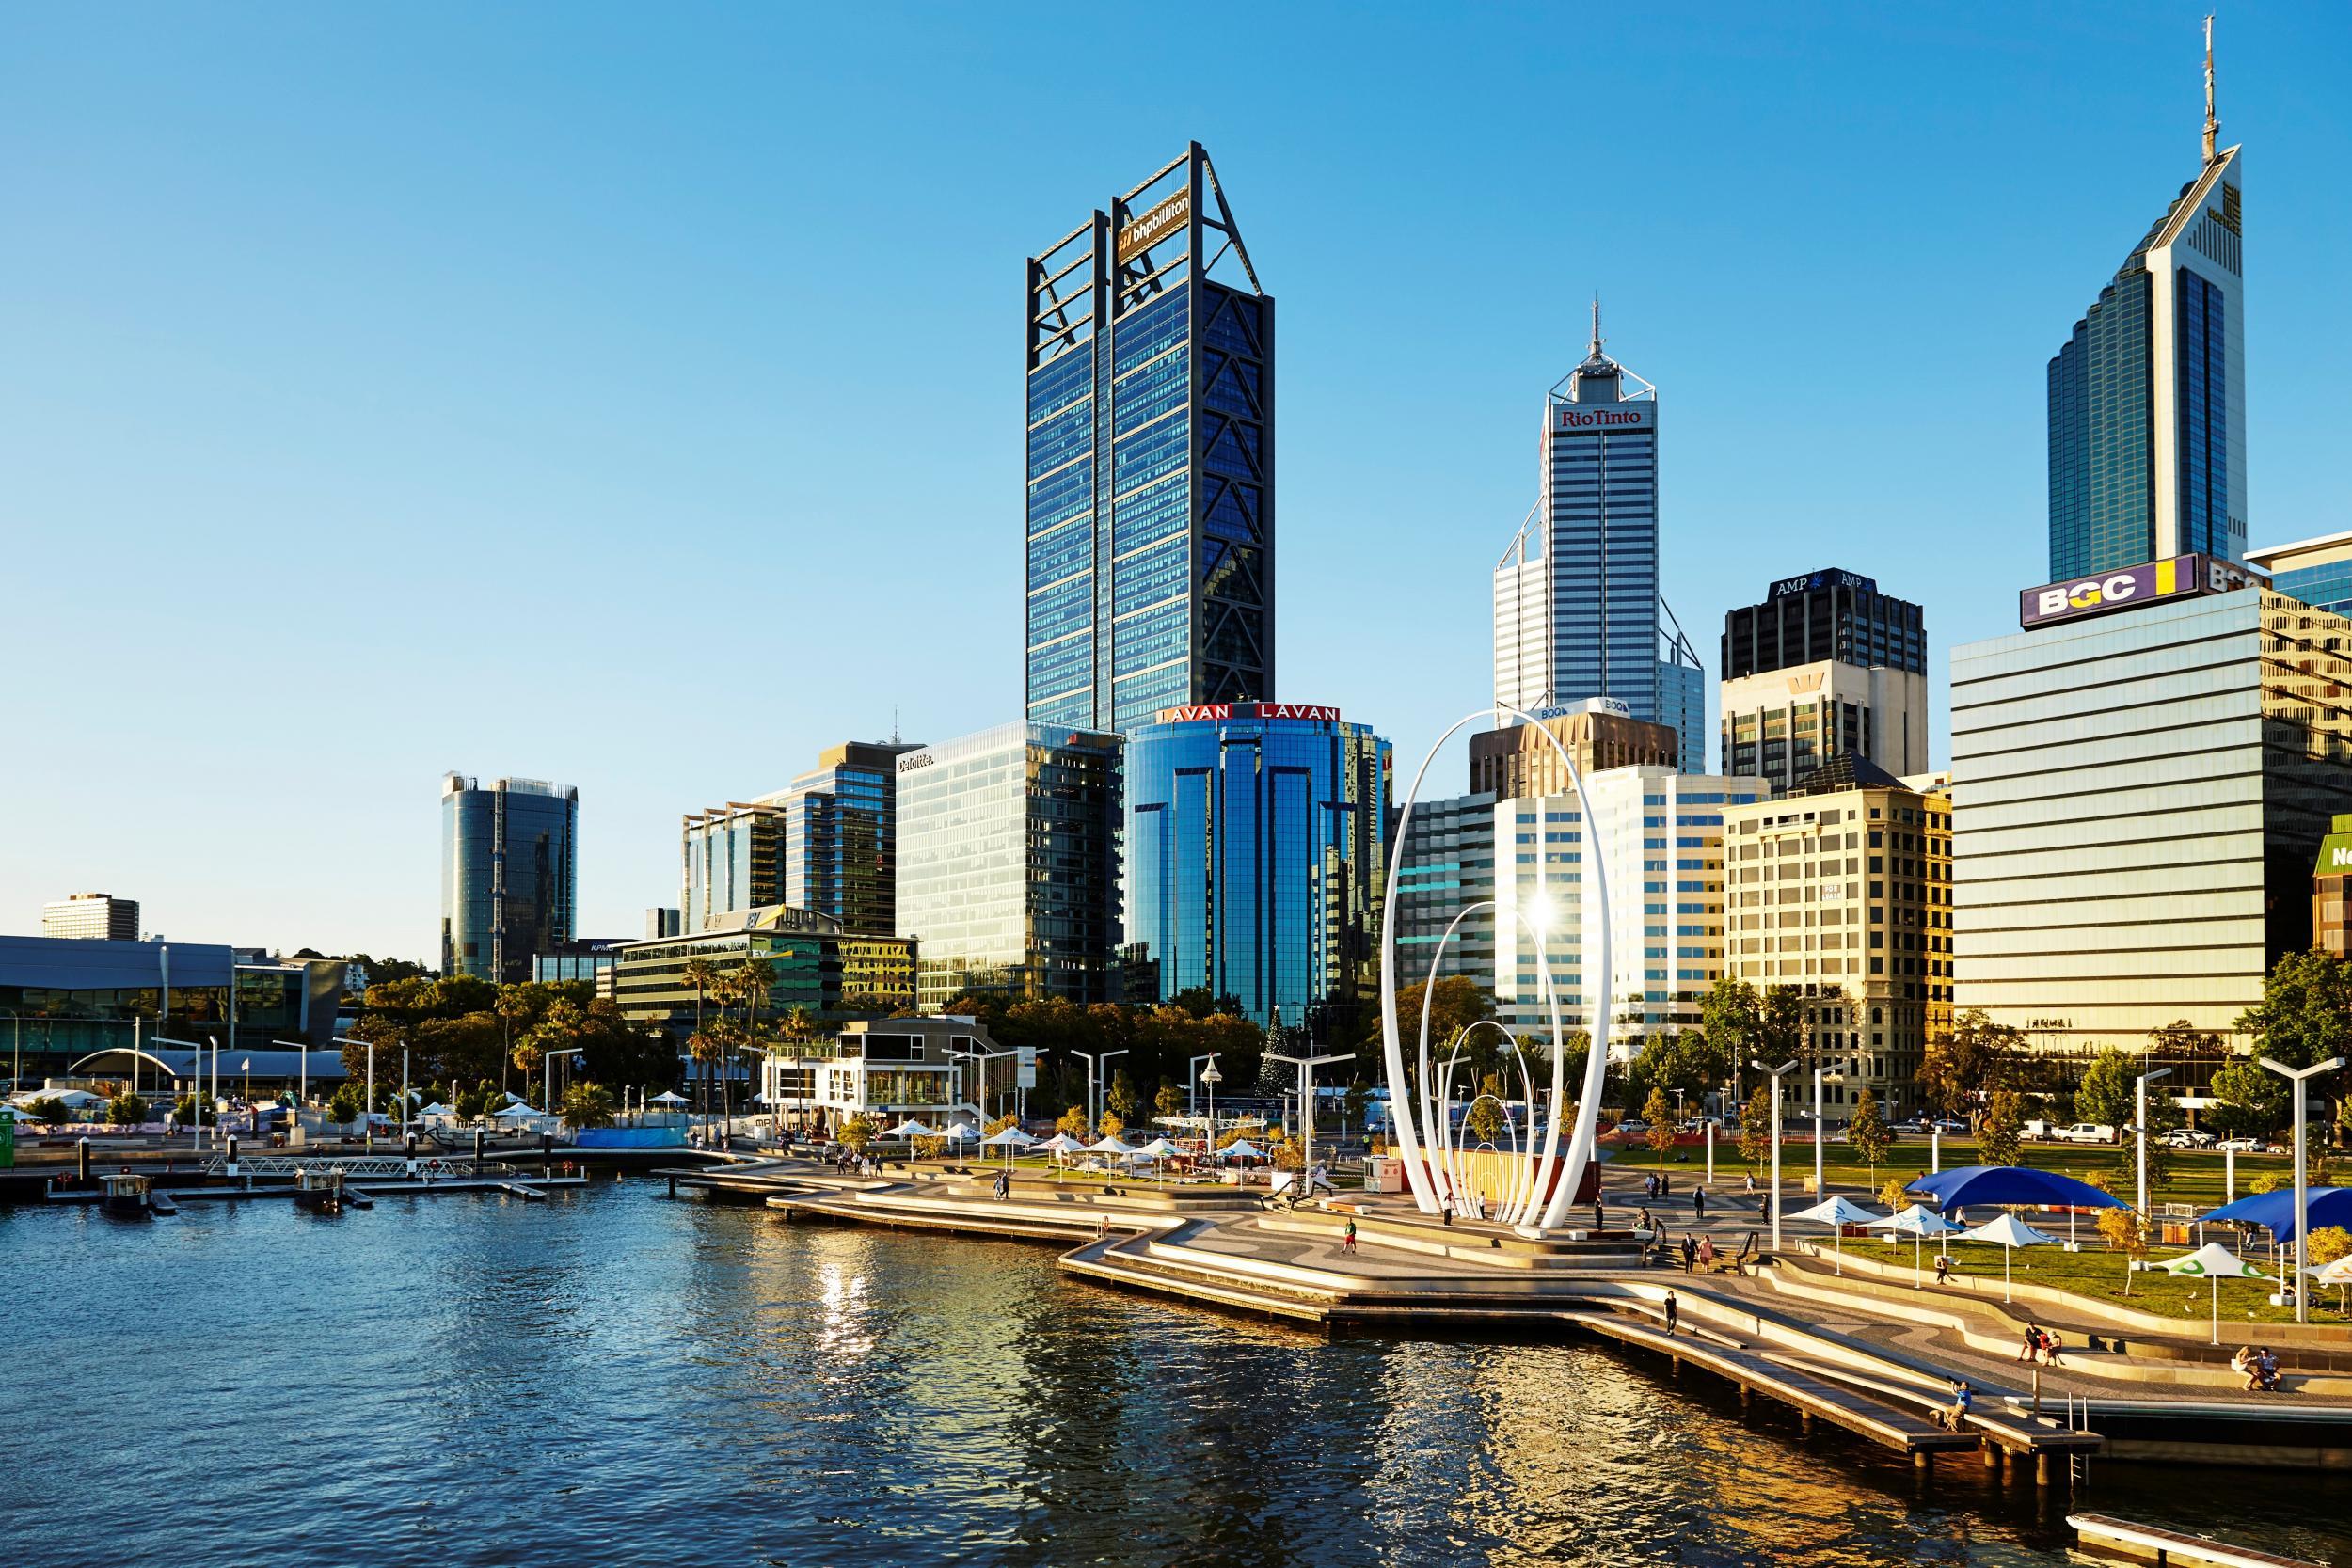 Elizabeth Quay in Perth, which will be finished in 2020